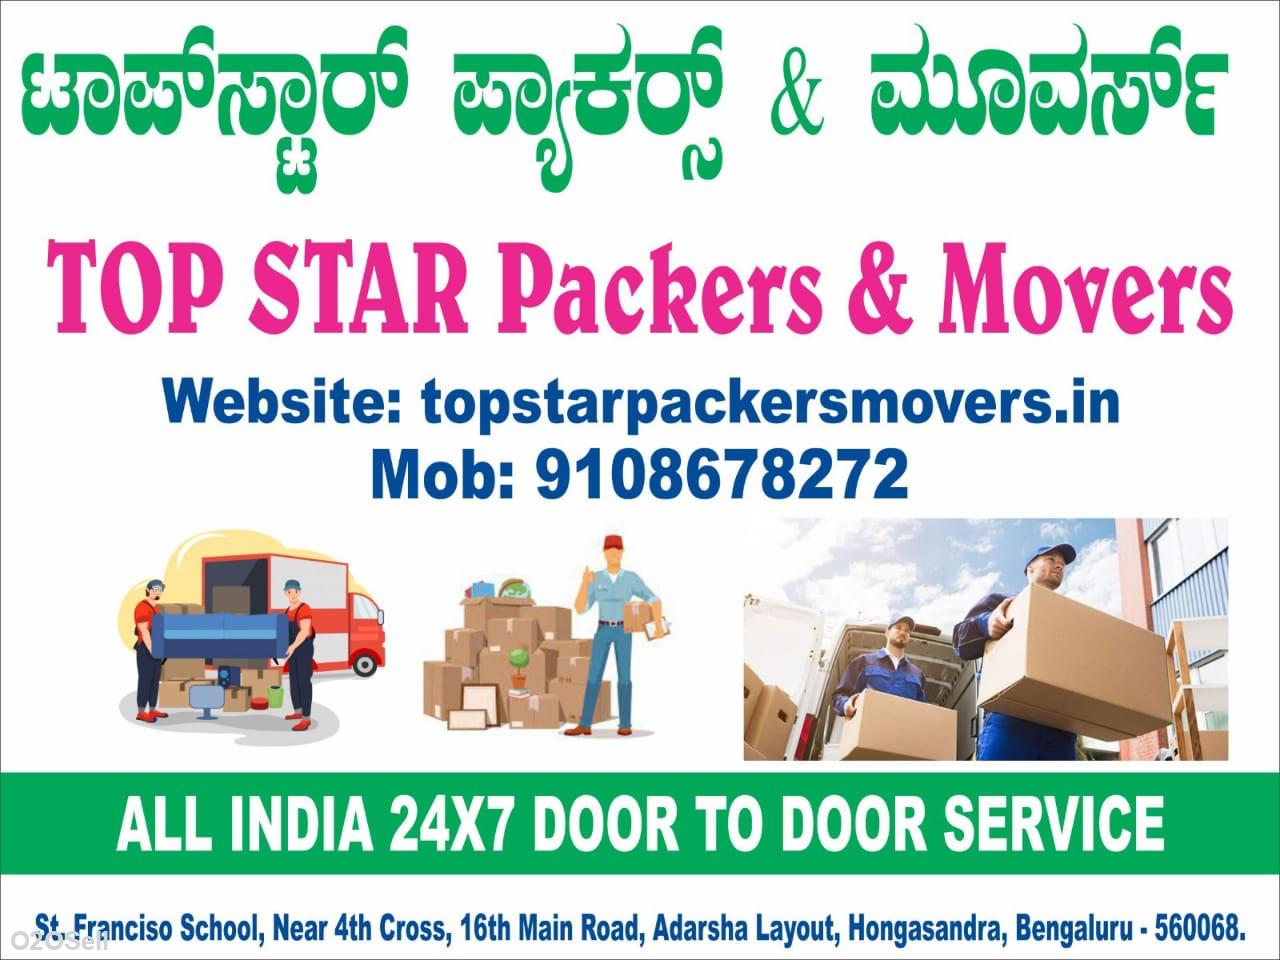 TOP STAR PACKERS AND MOVERS BANGALORE - Profile Image